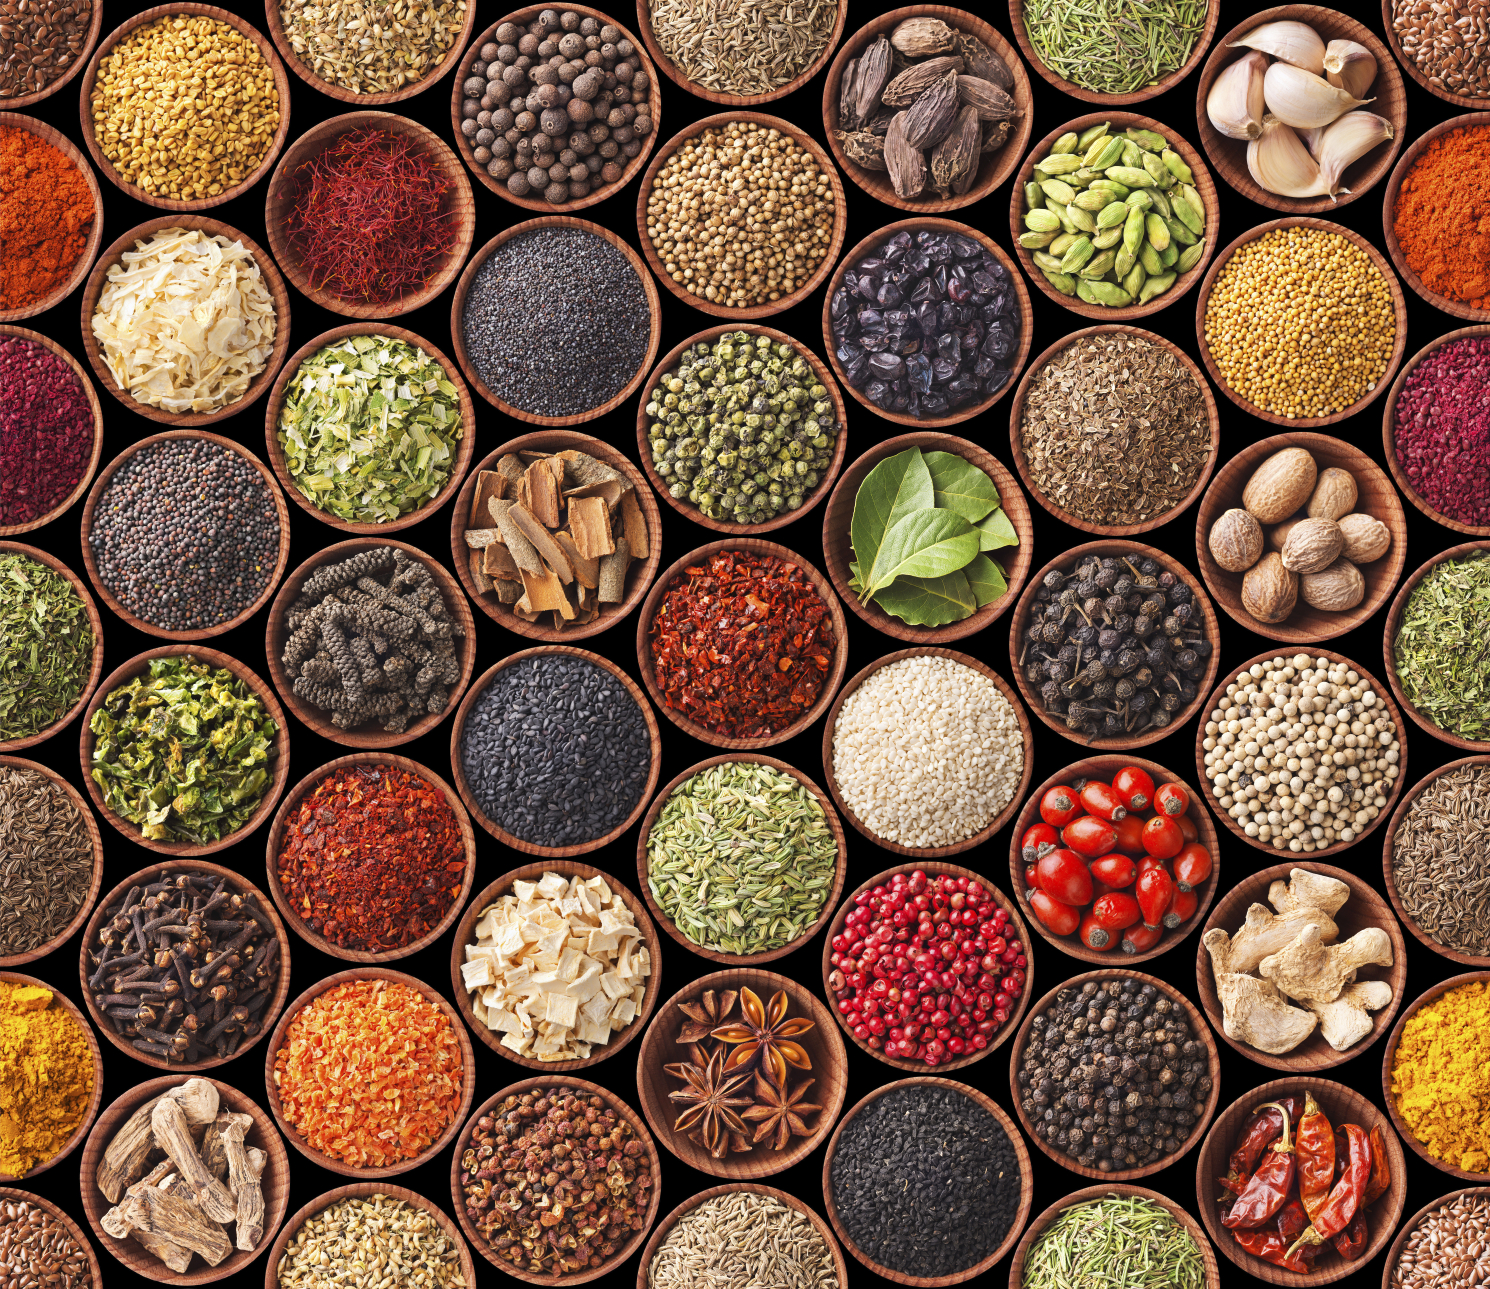 Got spice? A culinary tour of India